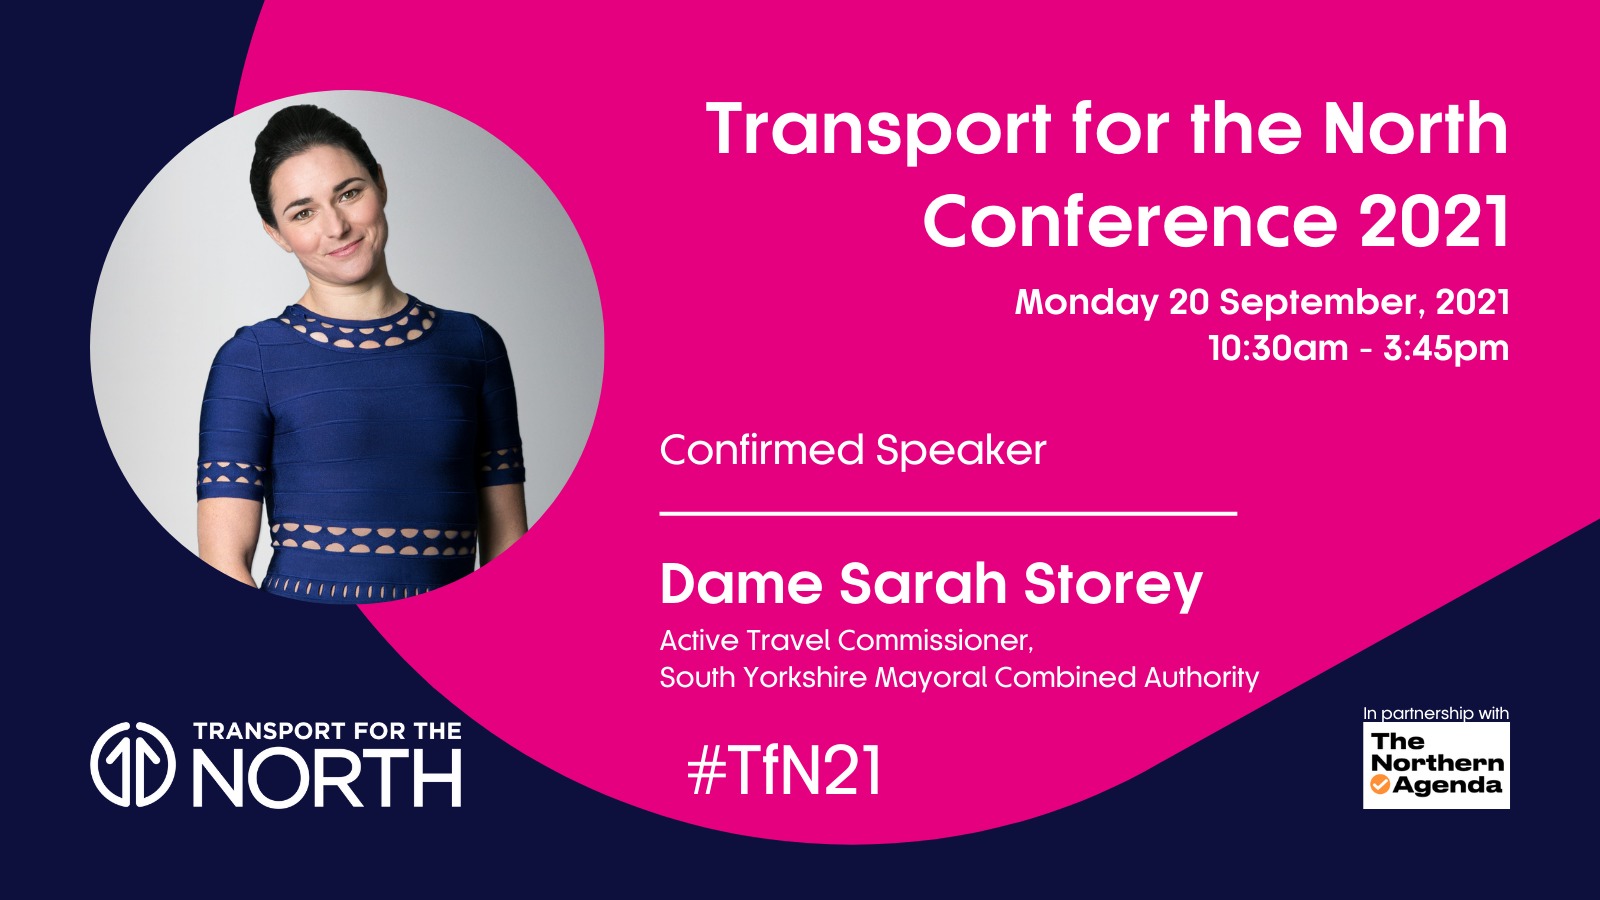 Dame Sarah Storey to join the closing plenary at Transport for the North's Annual Conference 2021